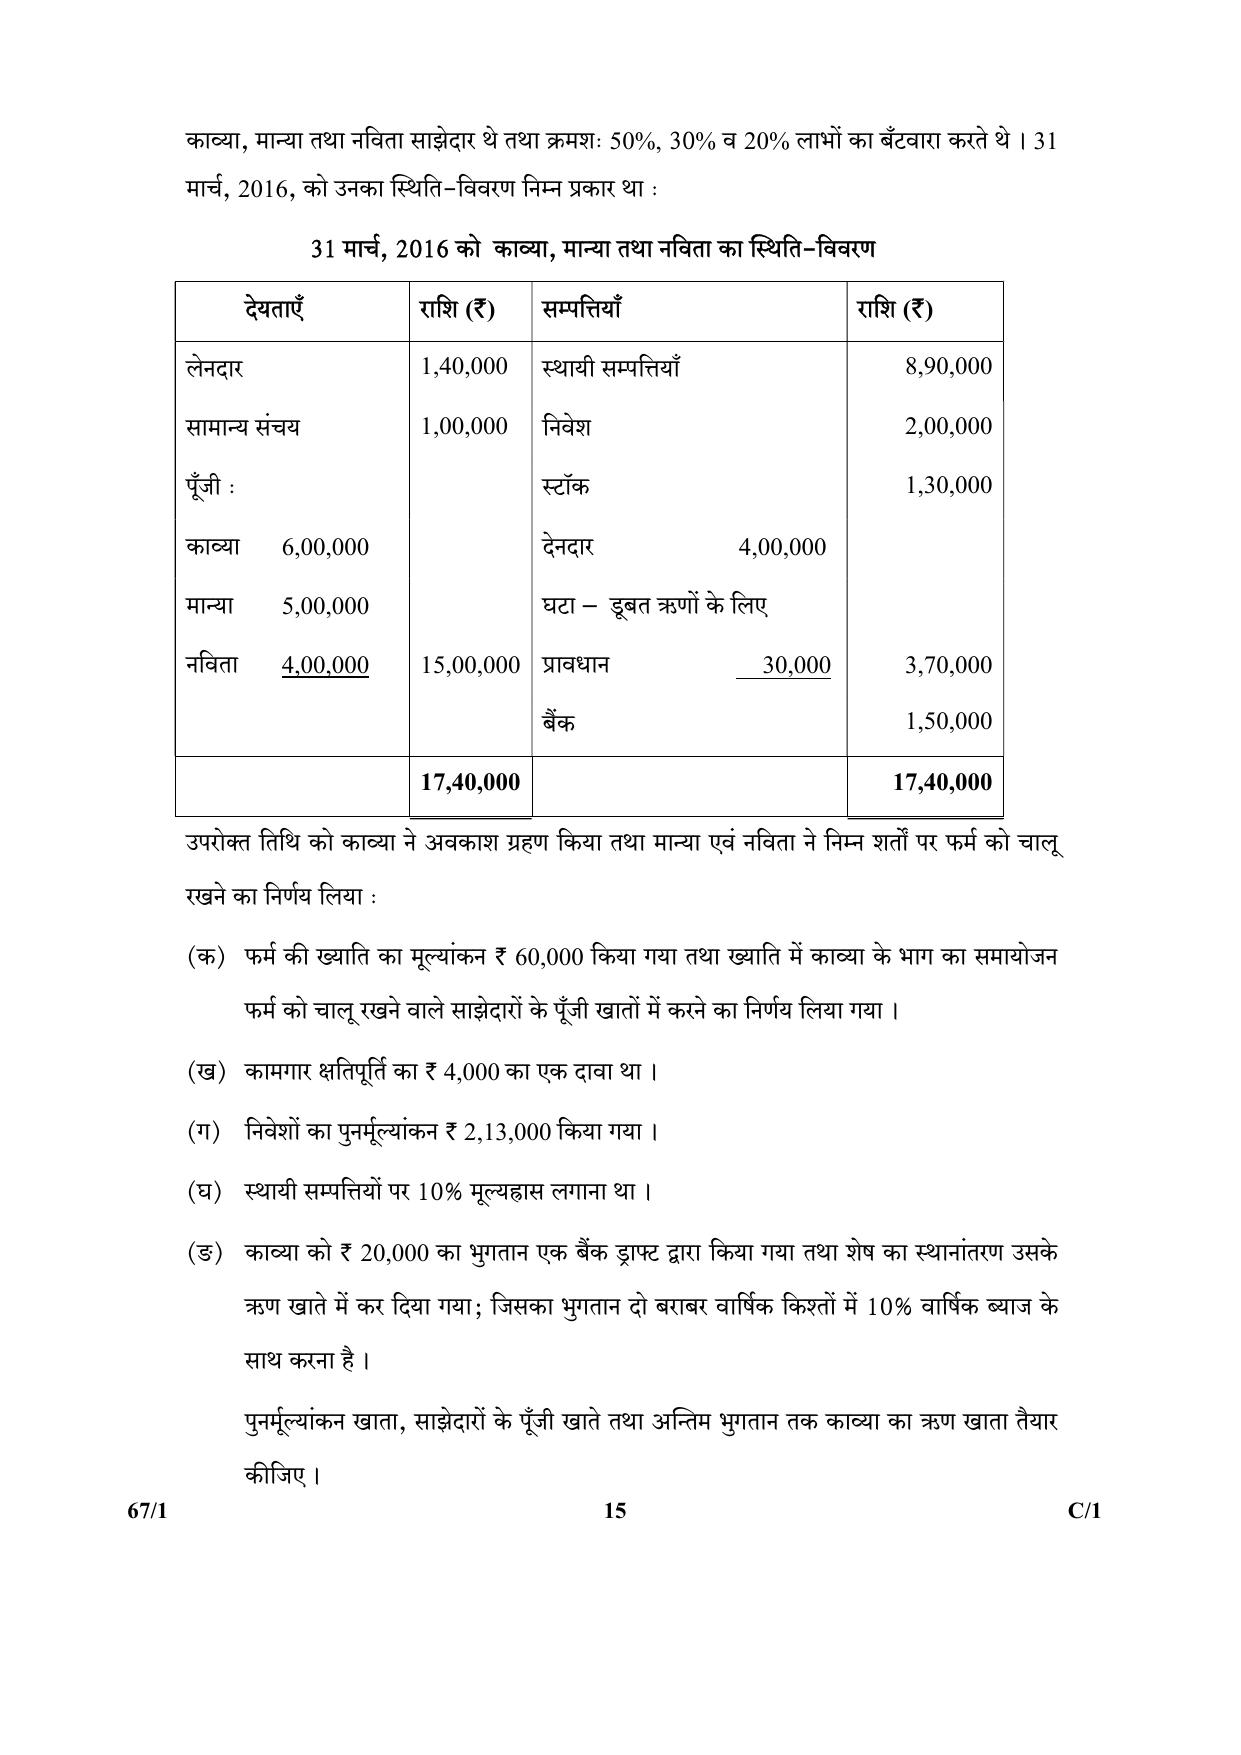 CBSE Class 12 67-1  (Accountancy) 2018 Compartment Question Paper - Page 15